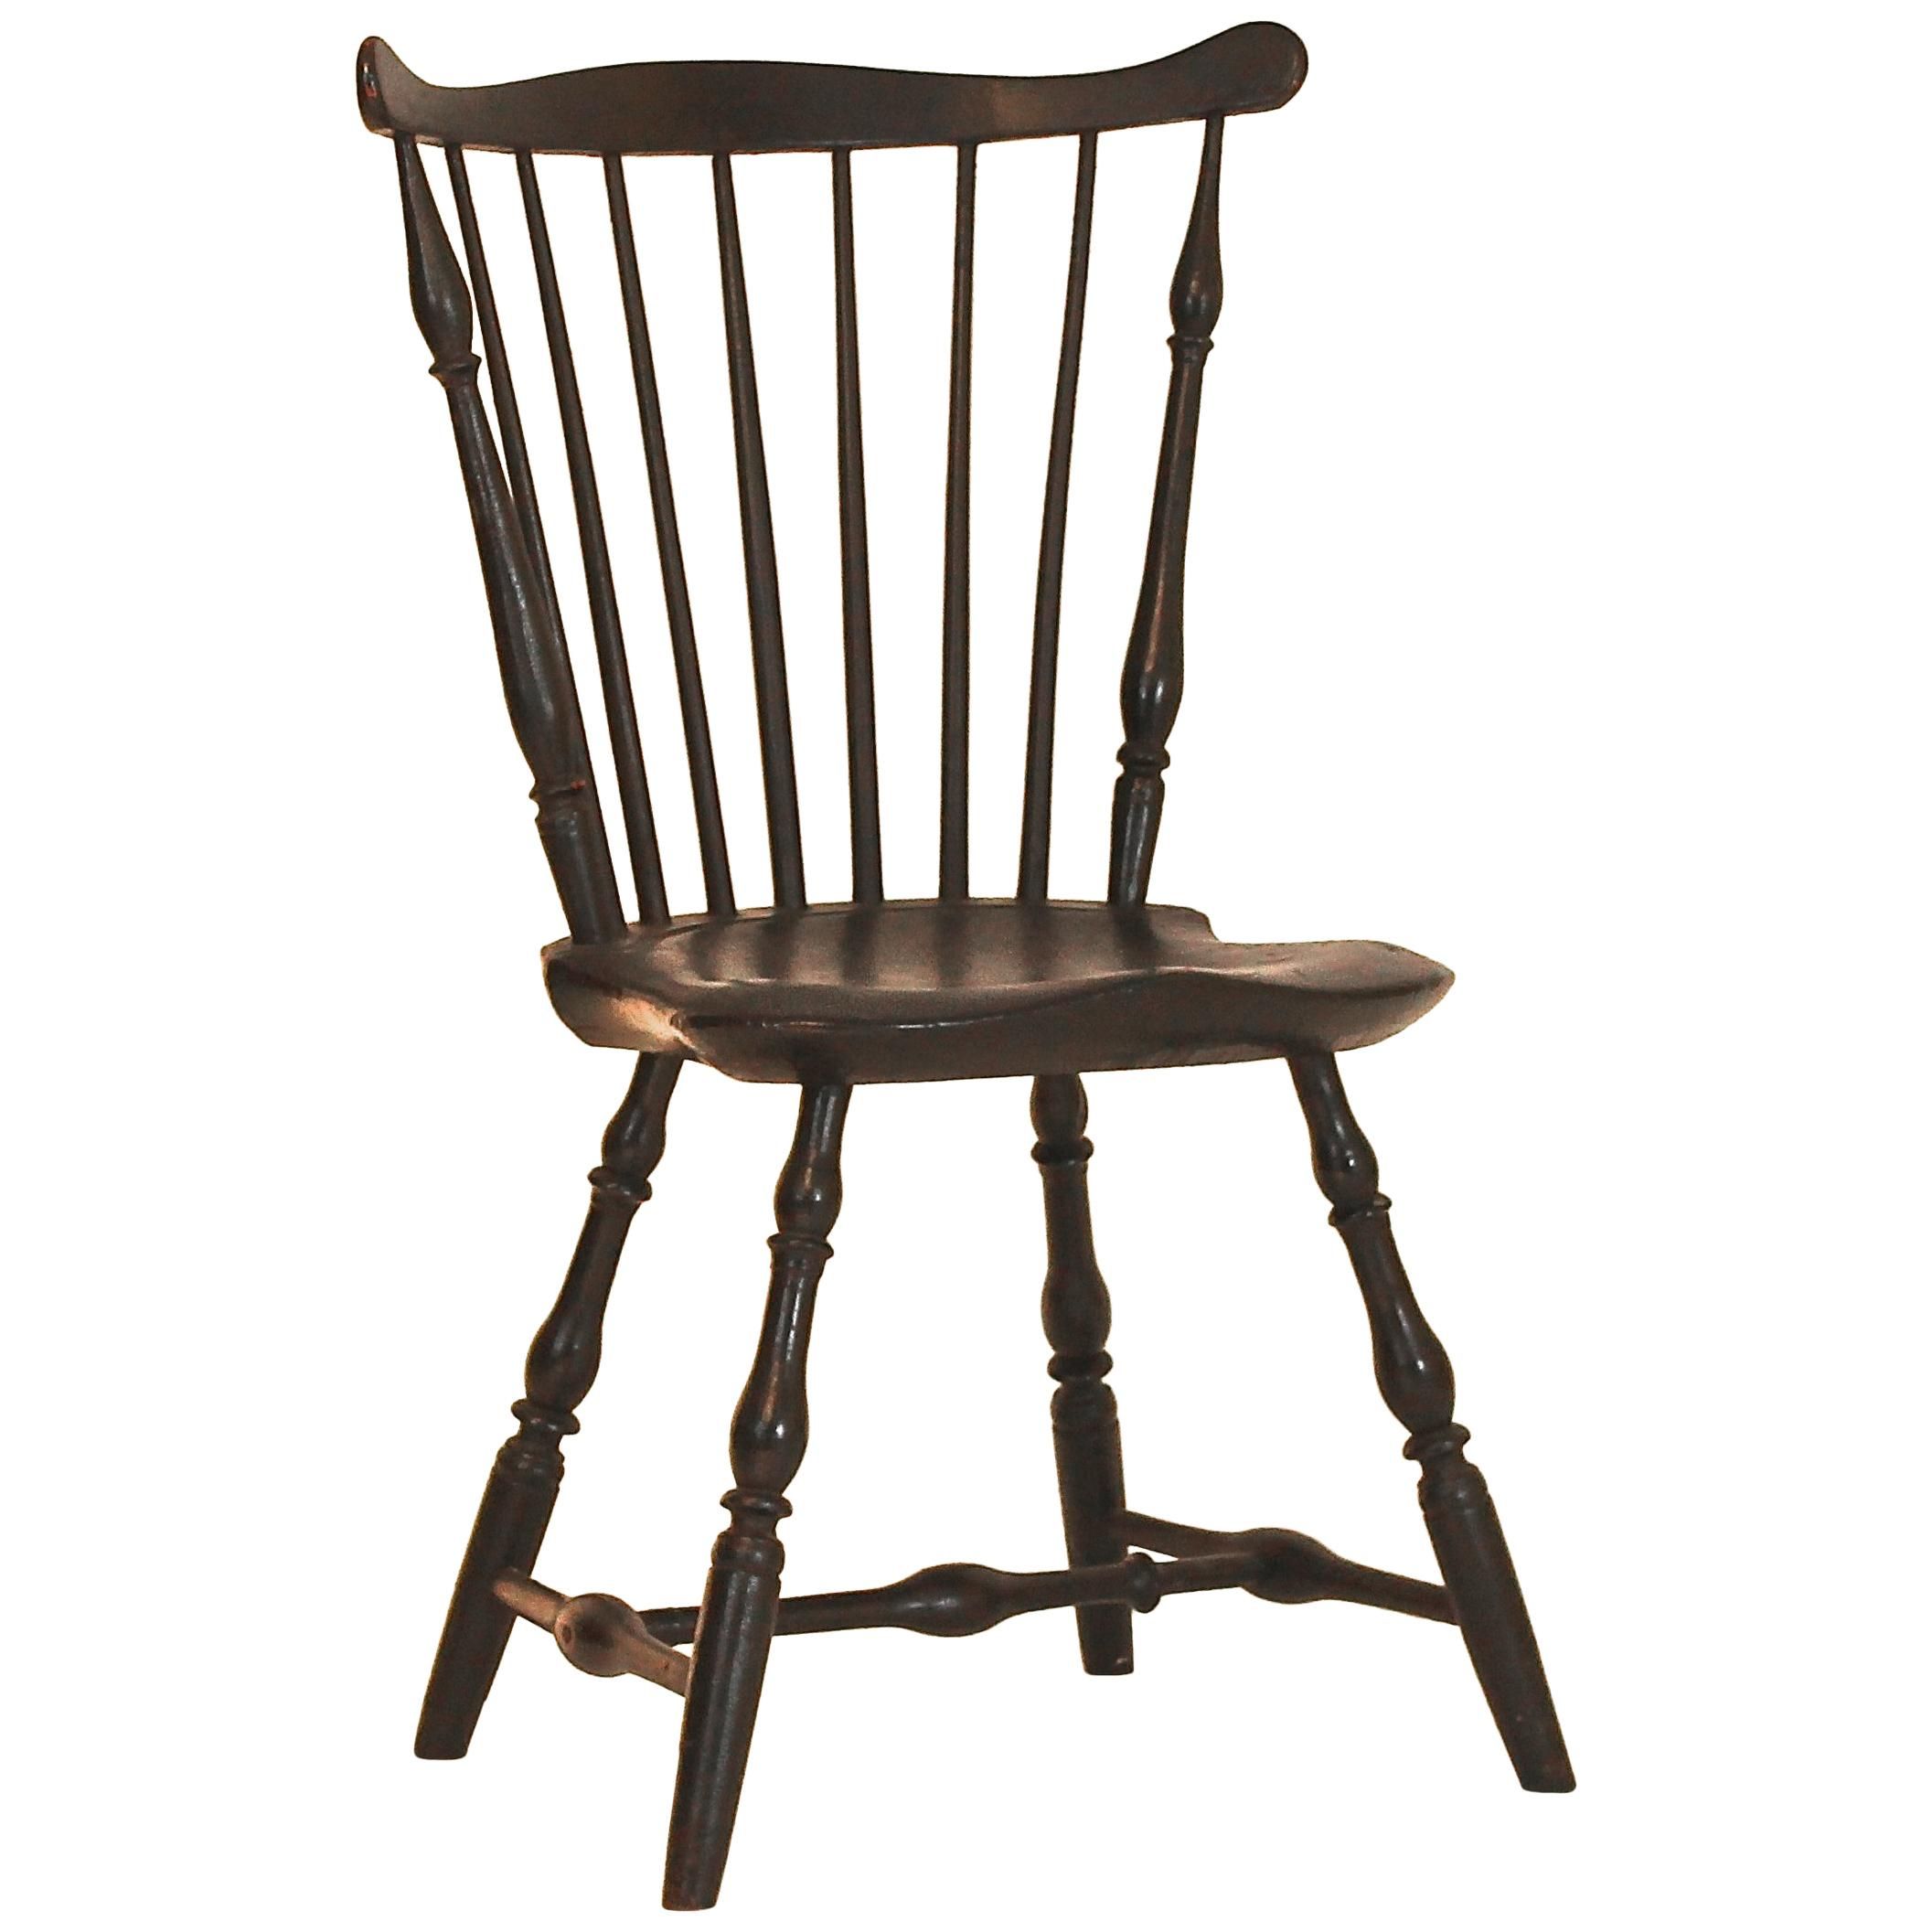 Antique And Vintage Windsor Chairs – 182 For Sale At 1stdibs With Regard To Black Back Windsor Rocking Chairs (Photo 10 of 20)